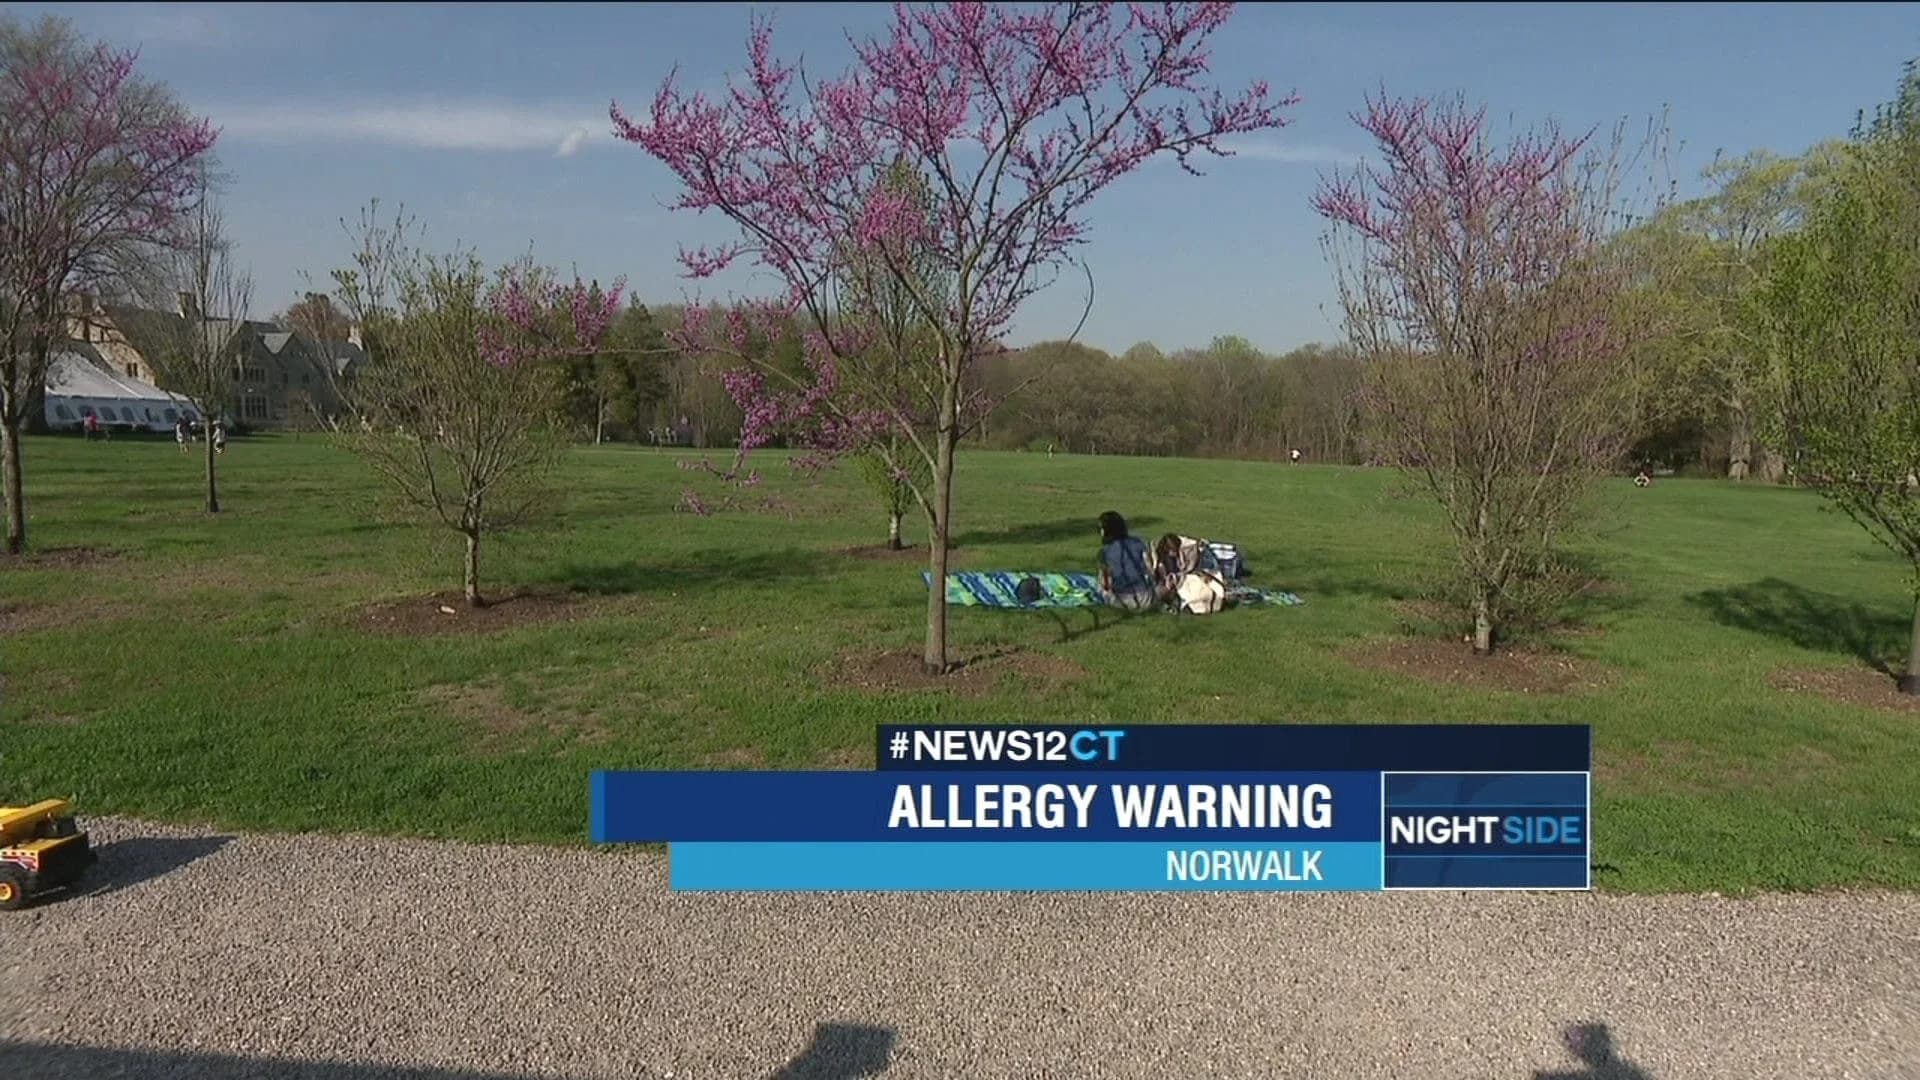 Warm weather causes trouble for asthma patients